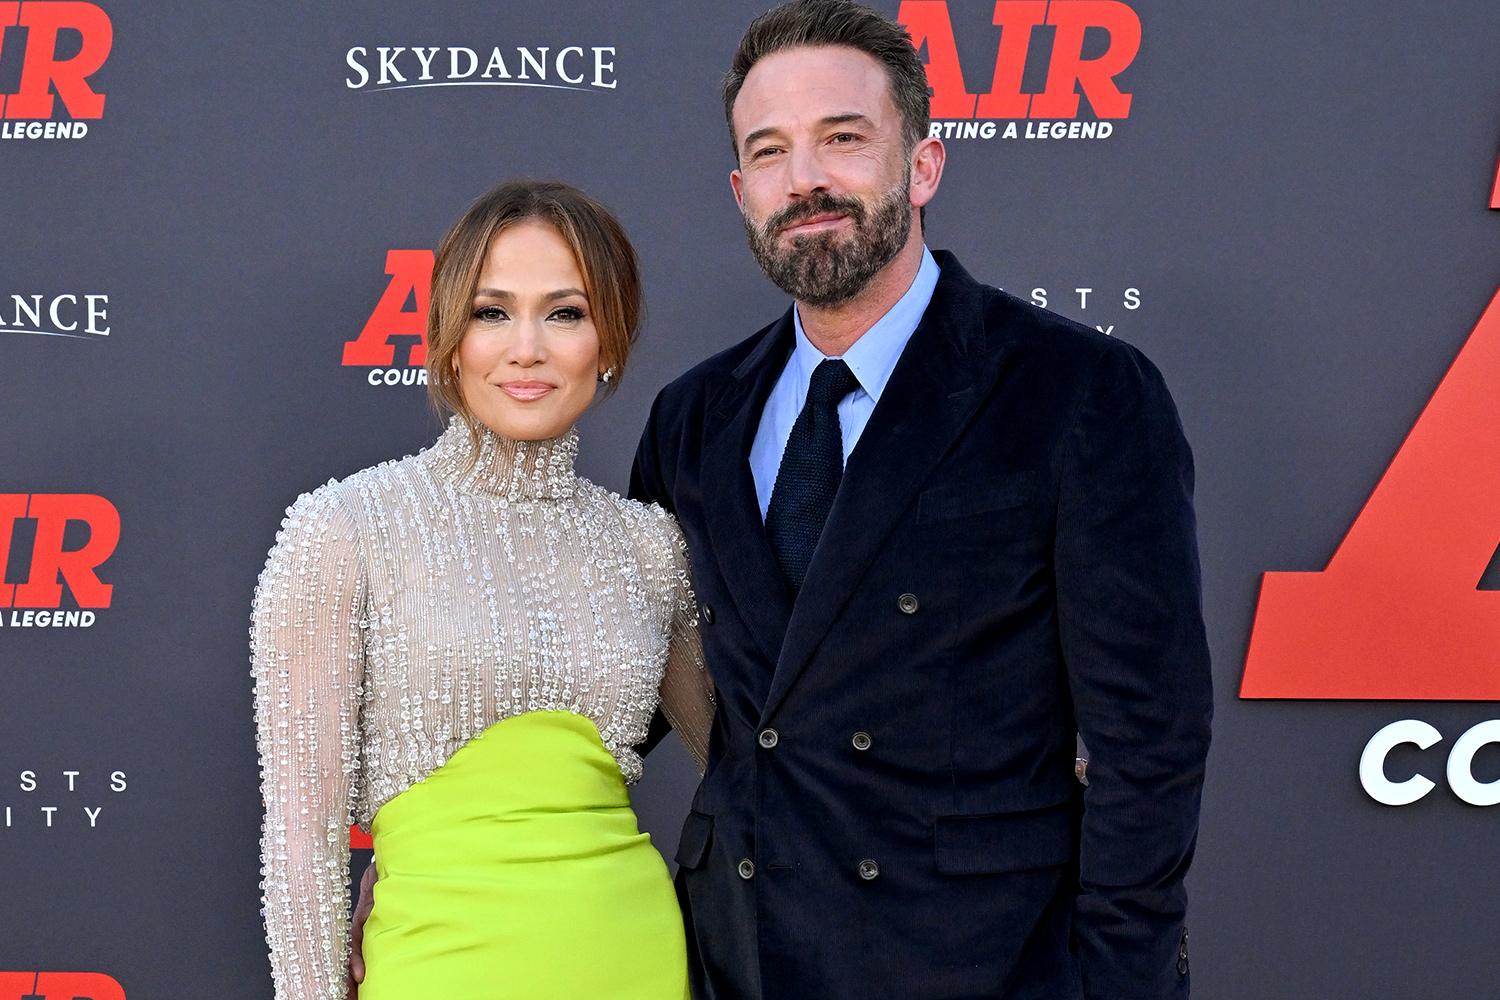 Ben Affleck's Daddy Skills "Brings Tears" To Jennifer Lopez's Eyes: "That's who he is" - Animated Times